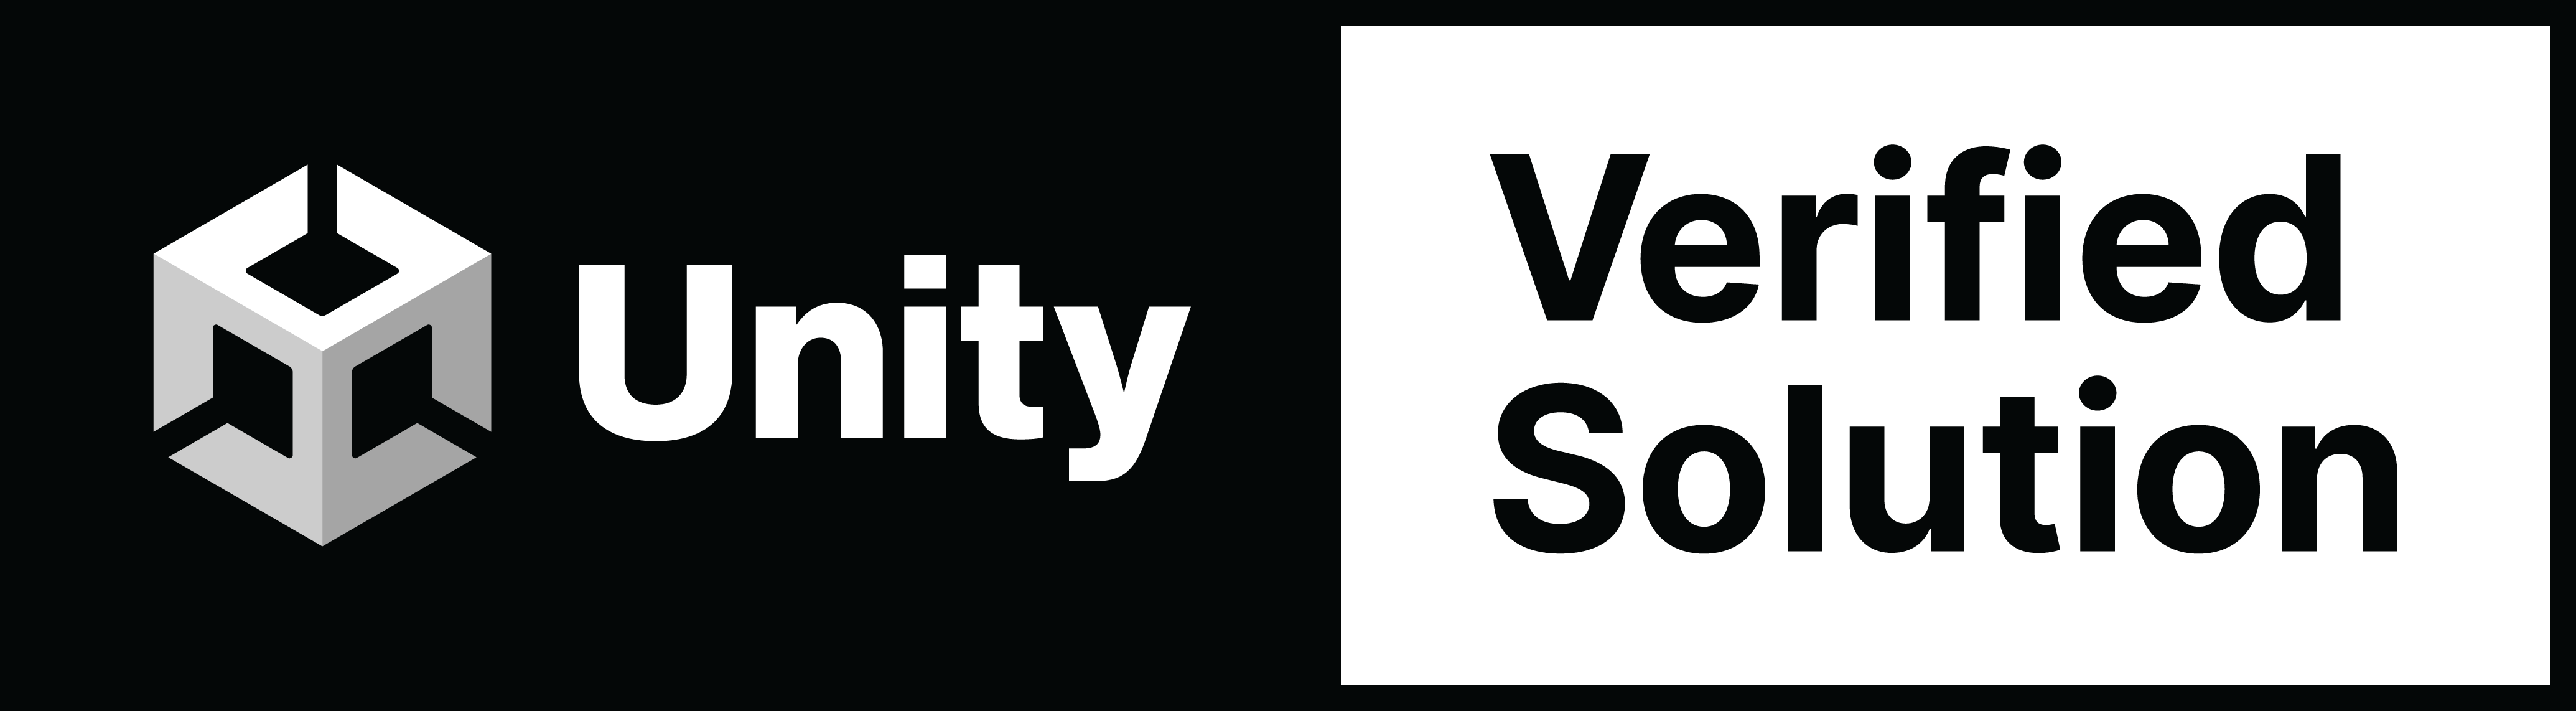 unity-verified-solution